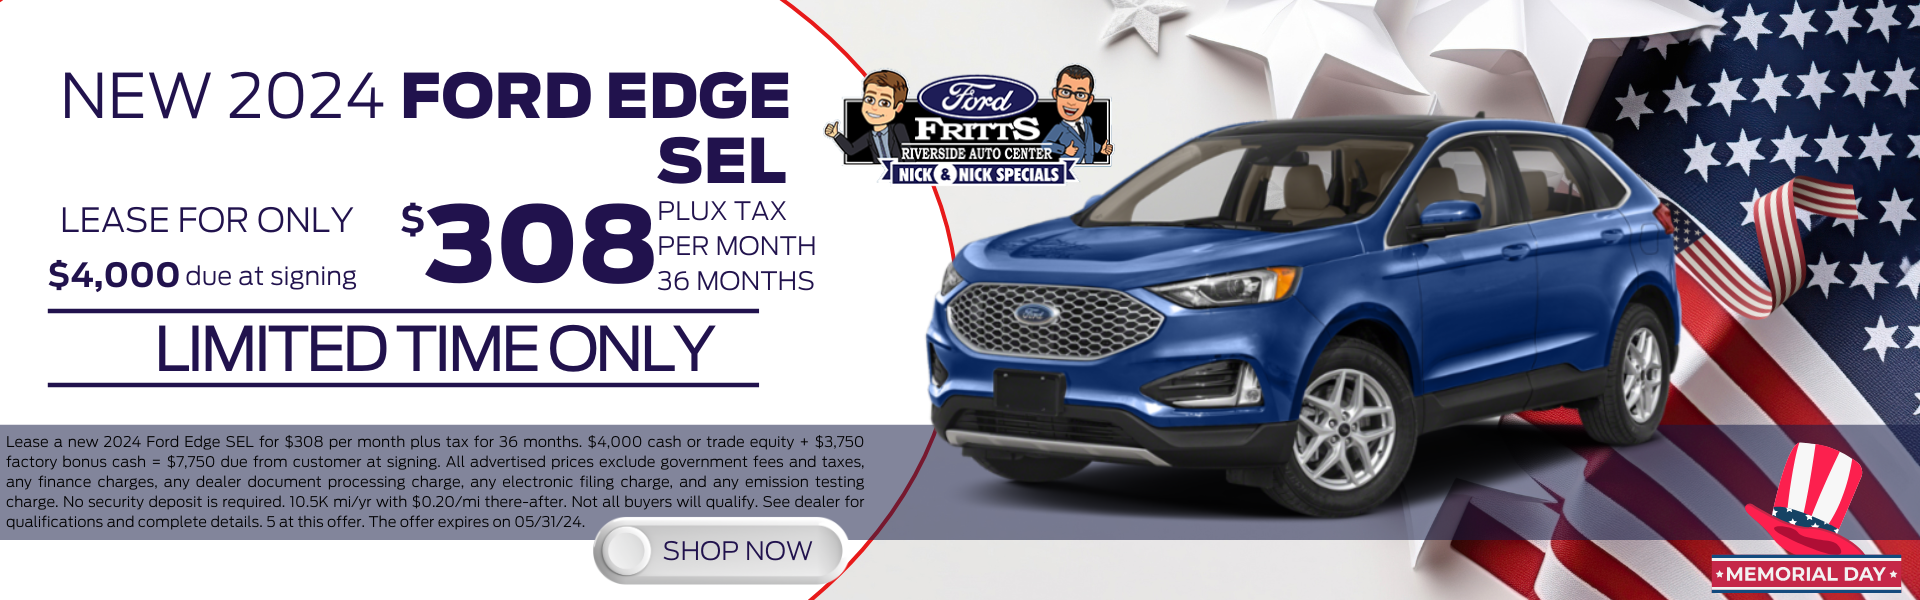 2024 Ford Edge SEL Lease Offer